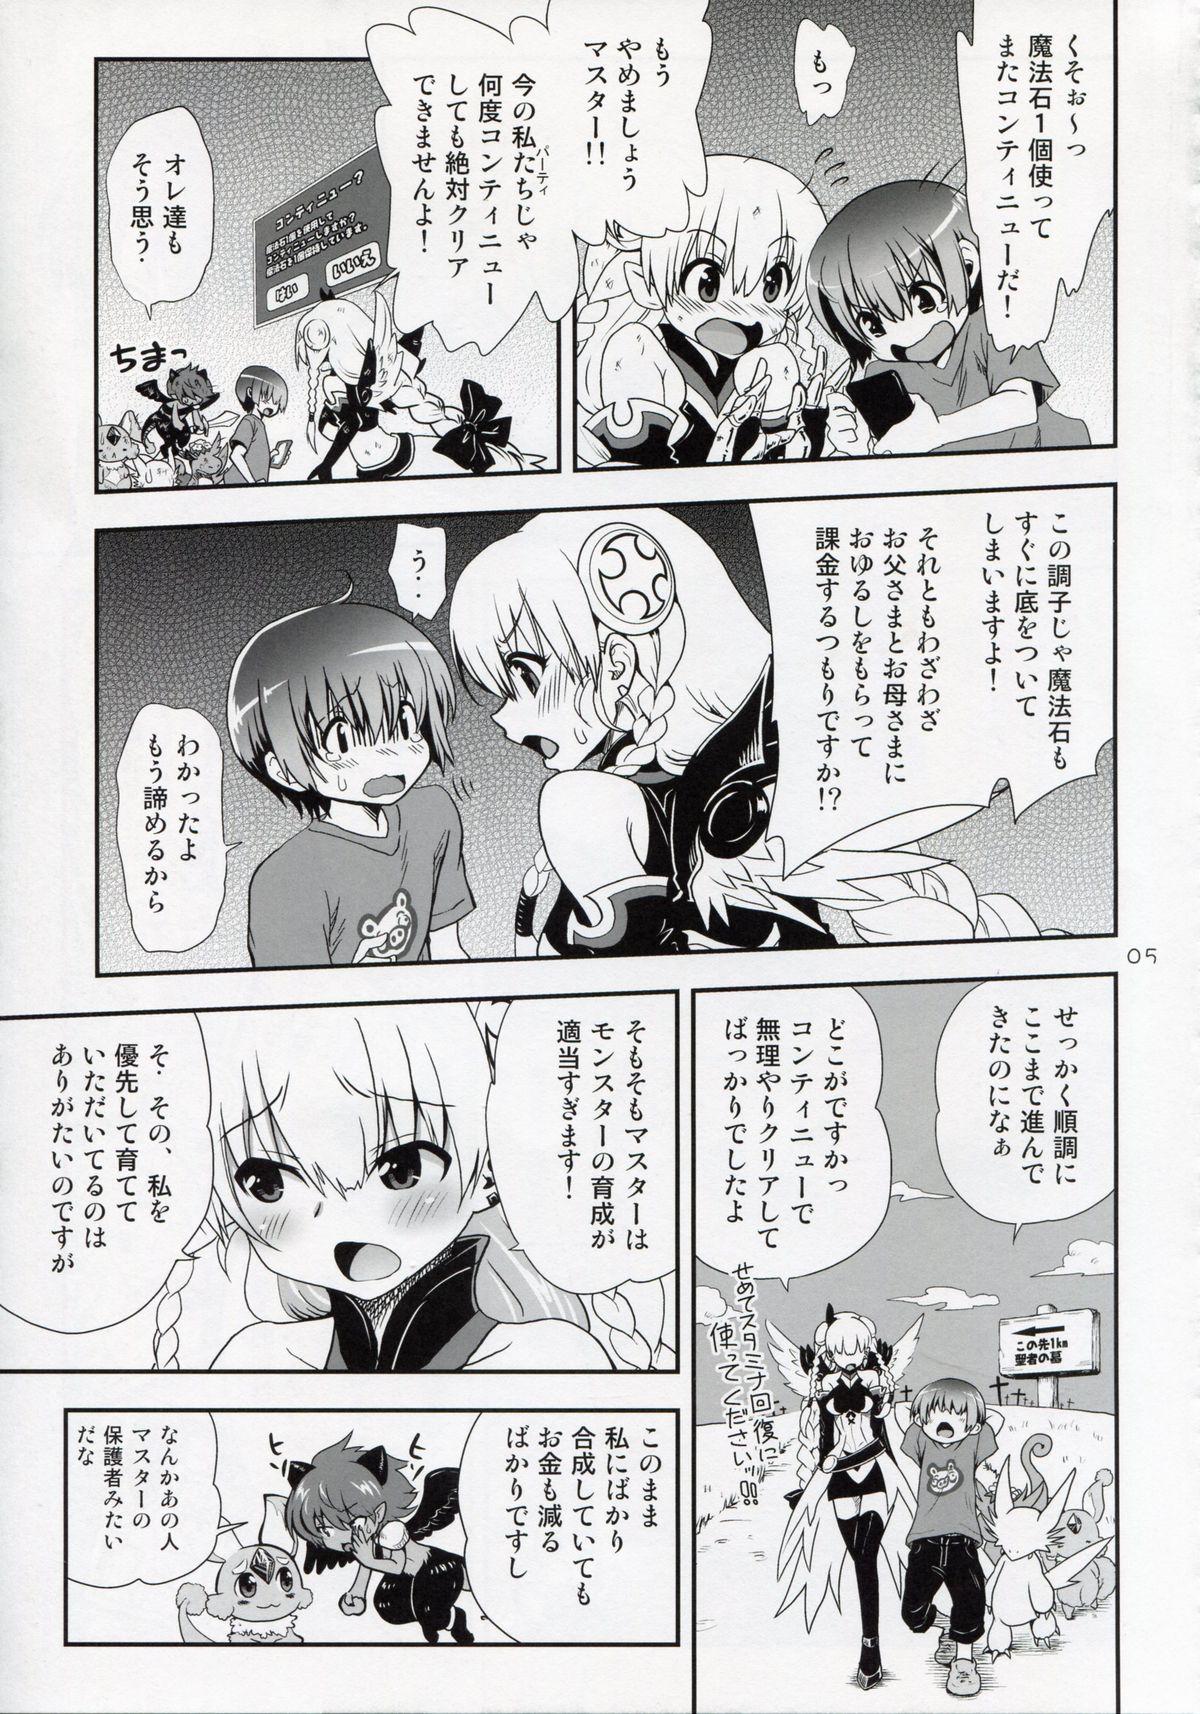 Loira Oyurushi Master - Puzzle and dragons Celebrity - Page 5